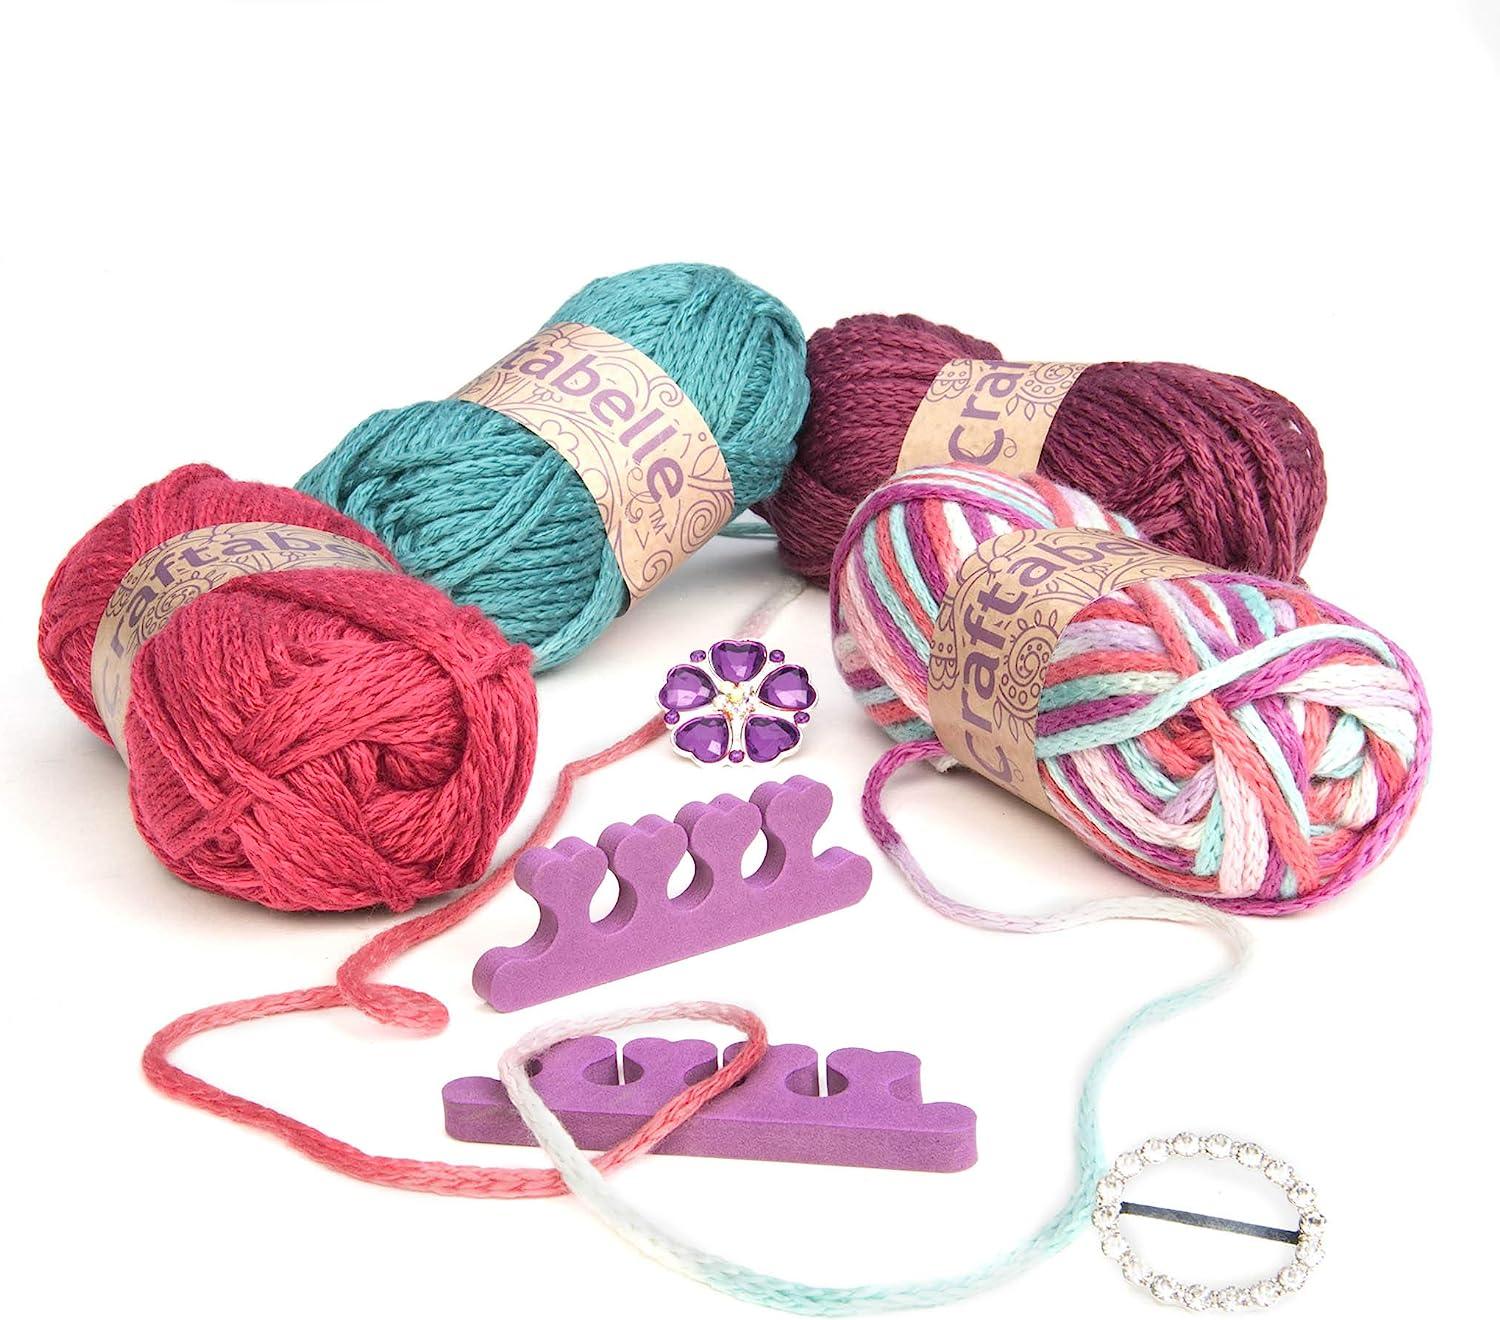 Craftabelle Finger Knit Creation Kit Beginner Knitting Kit 11pc Weaving Set  with Yarn and Accessories DIY Craft Kits for Kids Aged 8 Years +